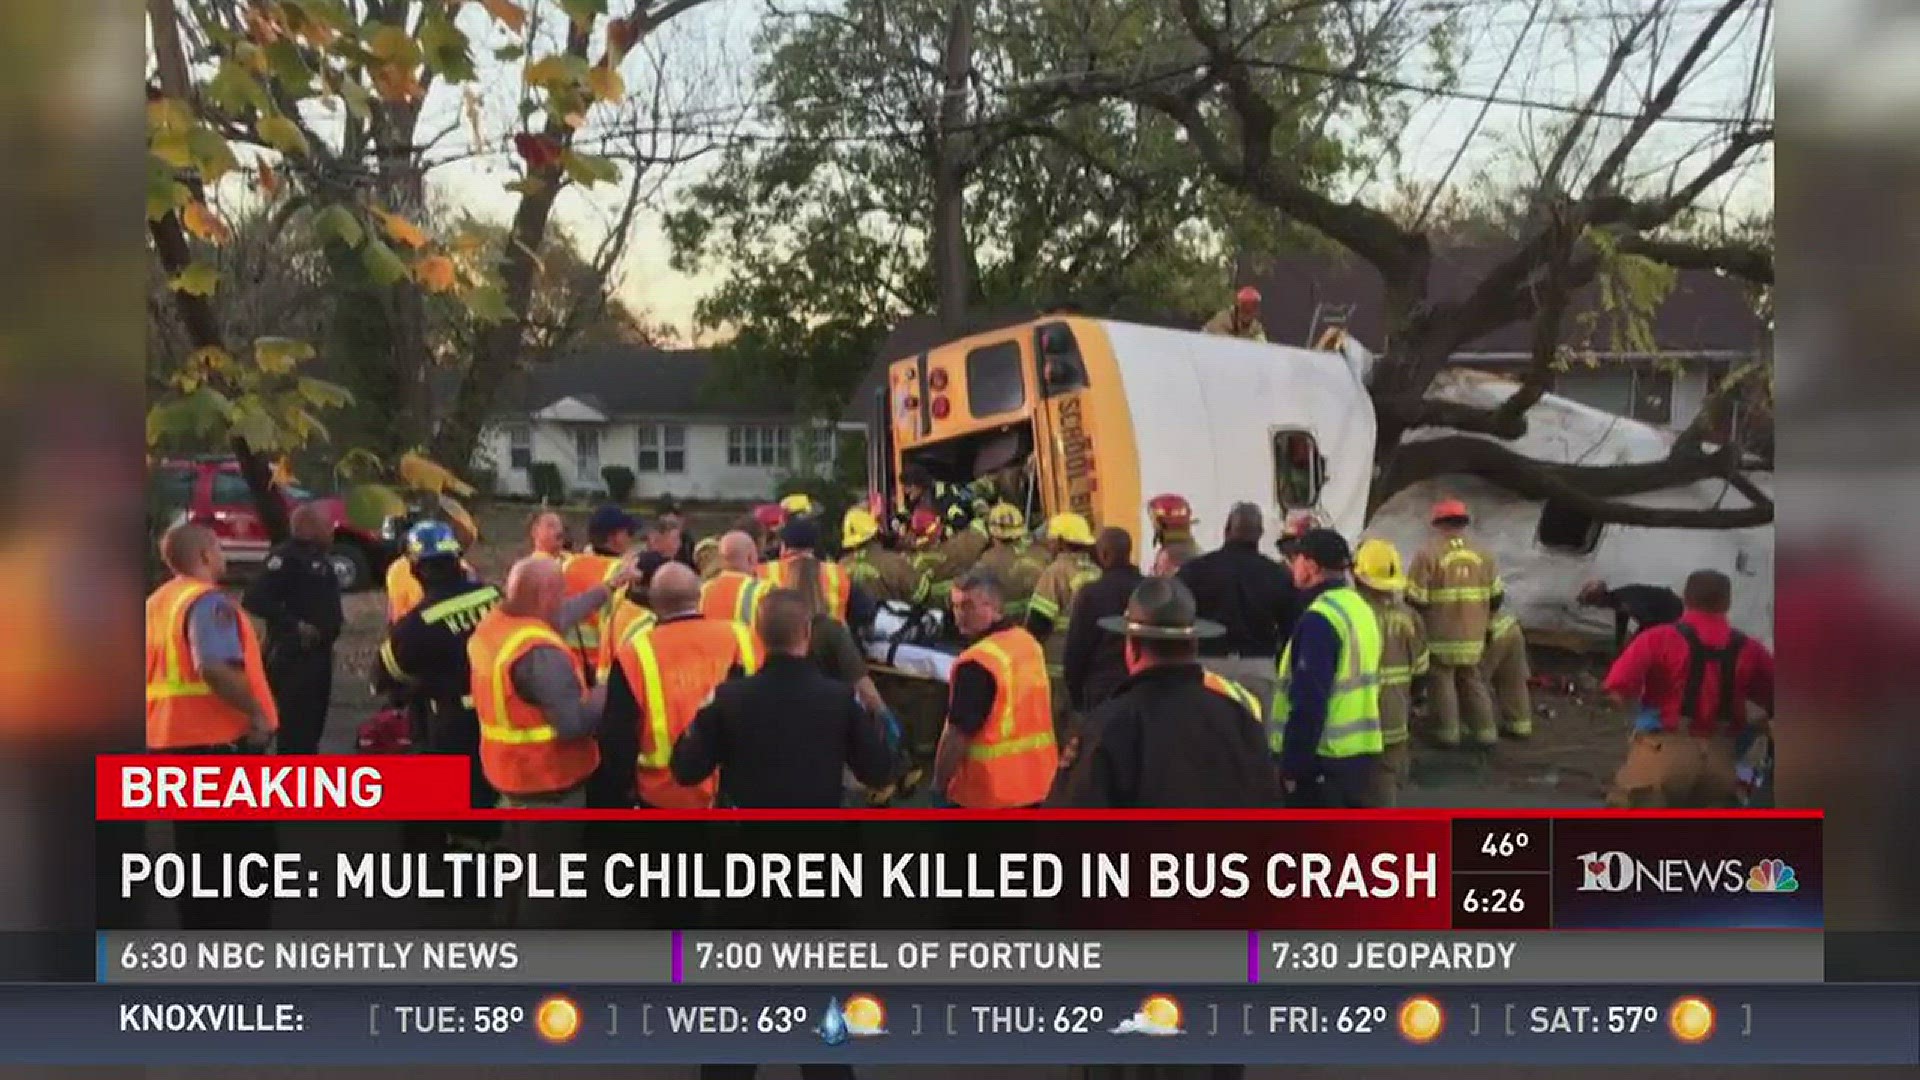 Chattanooga police confirm there were multiple fatalities in a bus crash today, but have not released the number.